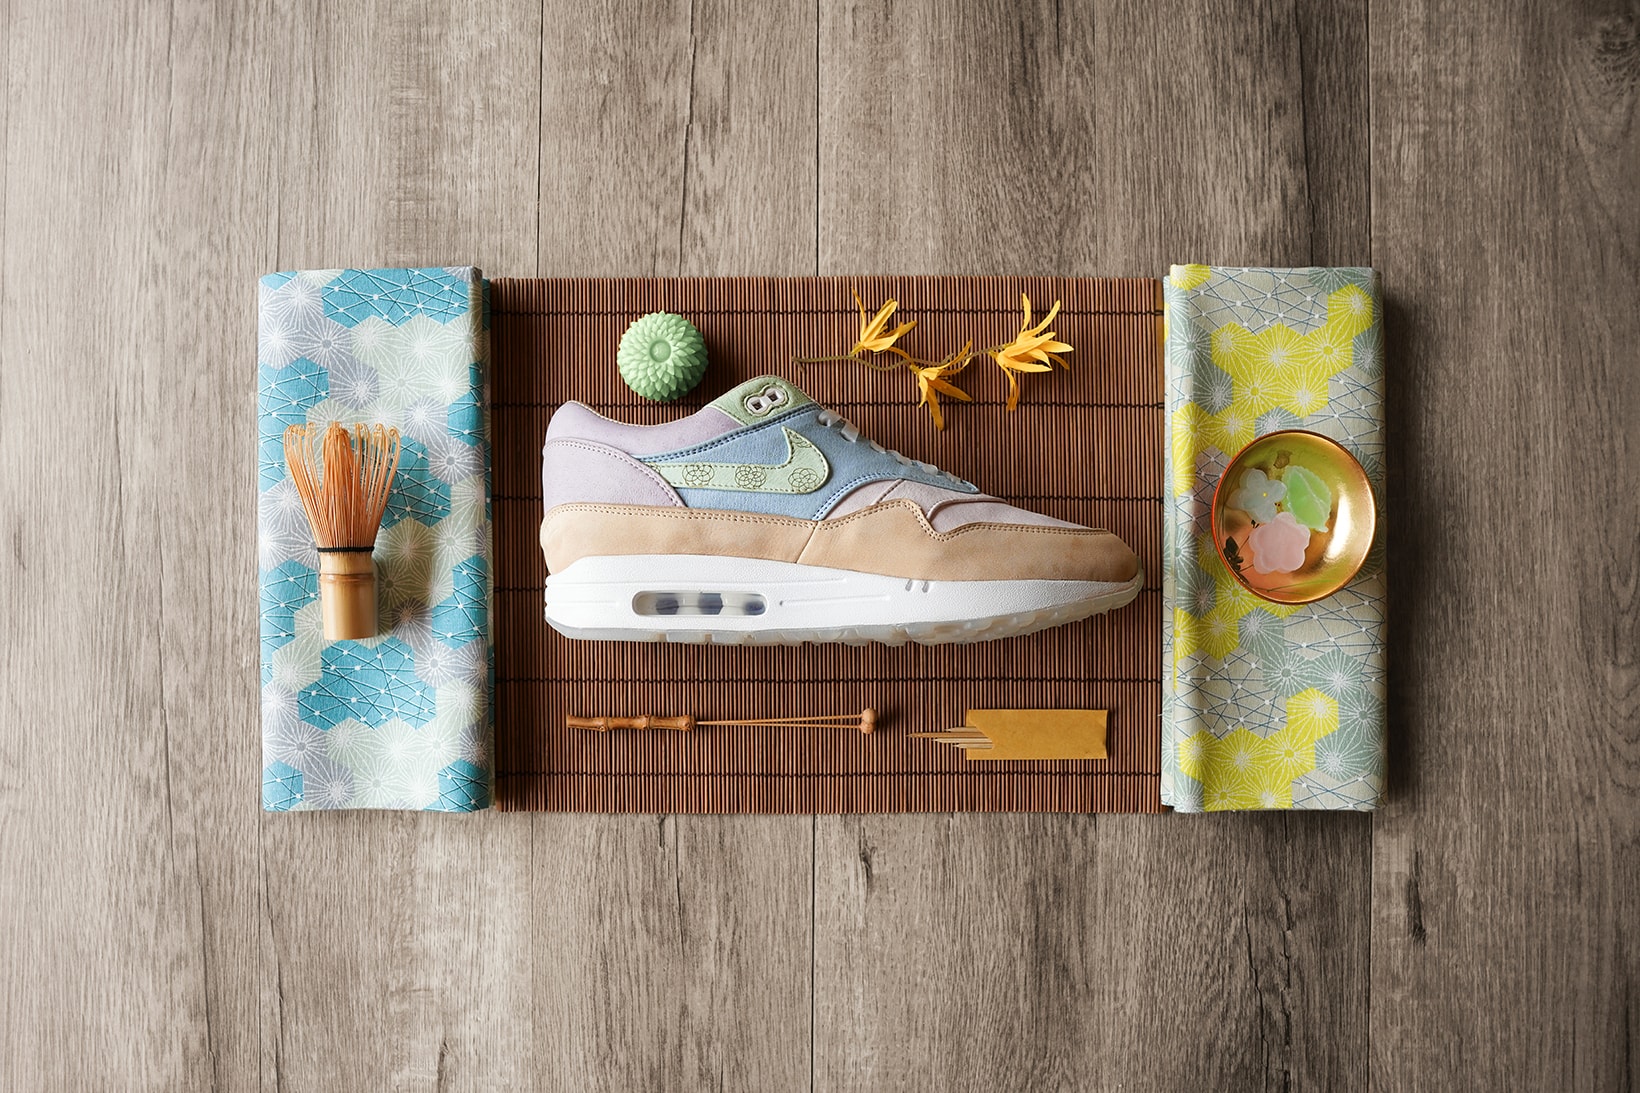 nike air max 1 wagashi traditional japanese sweets food ryustyler chase shiel collaboration custom sneakers pastel blue purple green brown shoes sneakerhead footwear